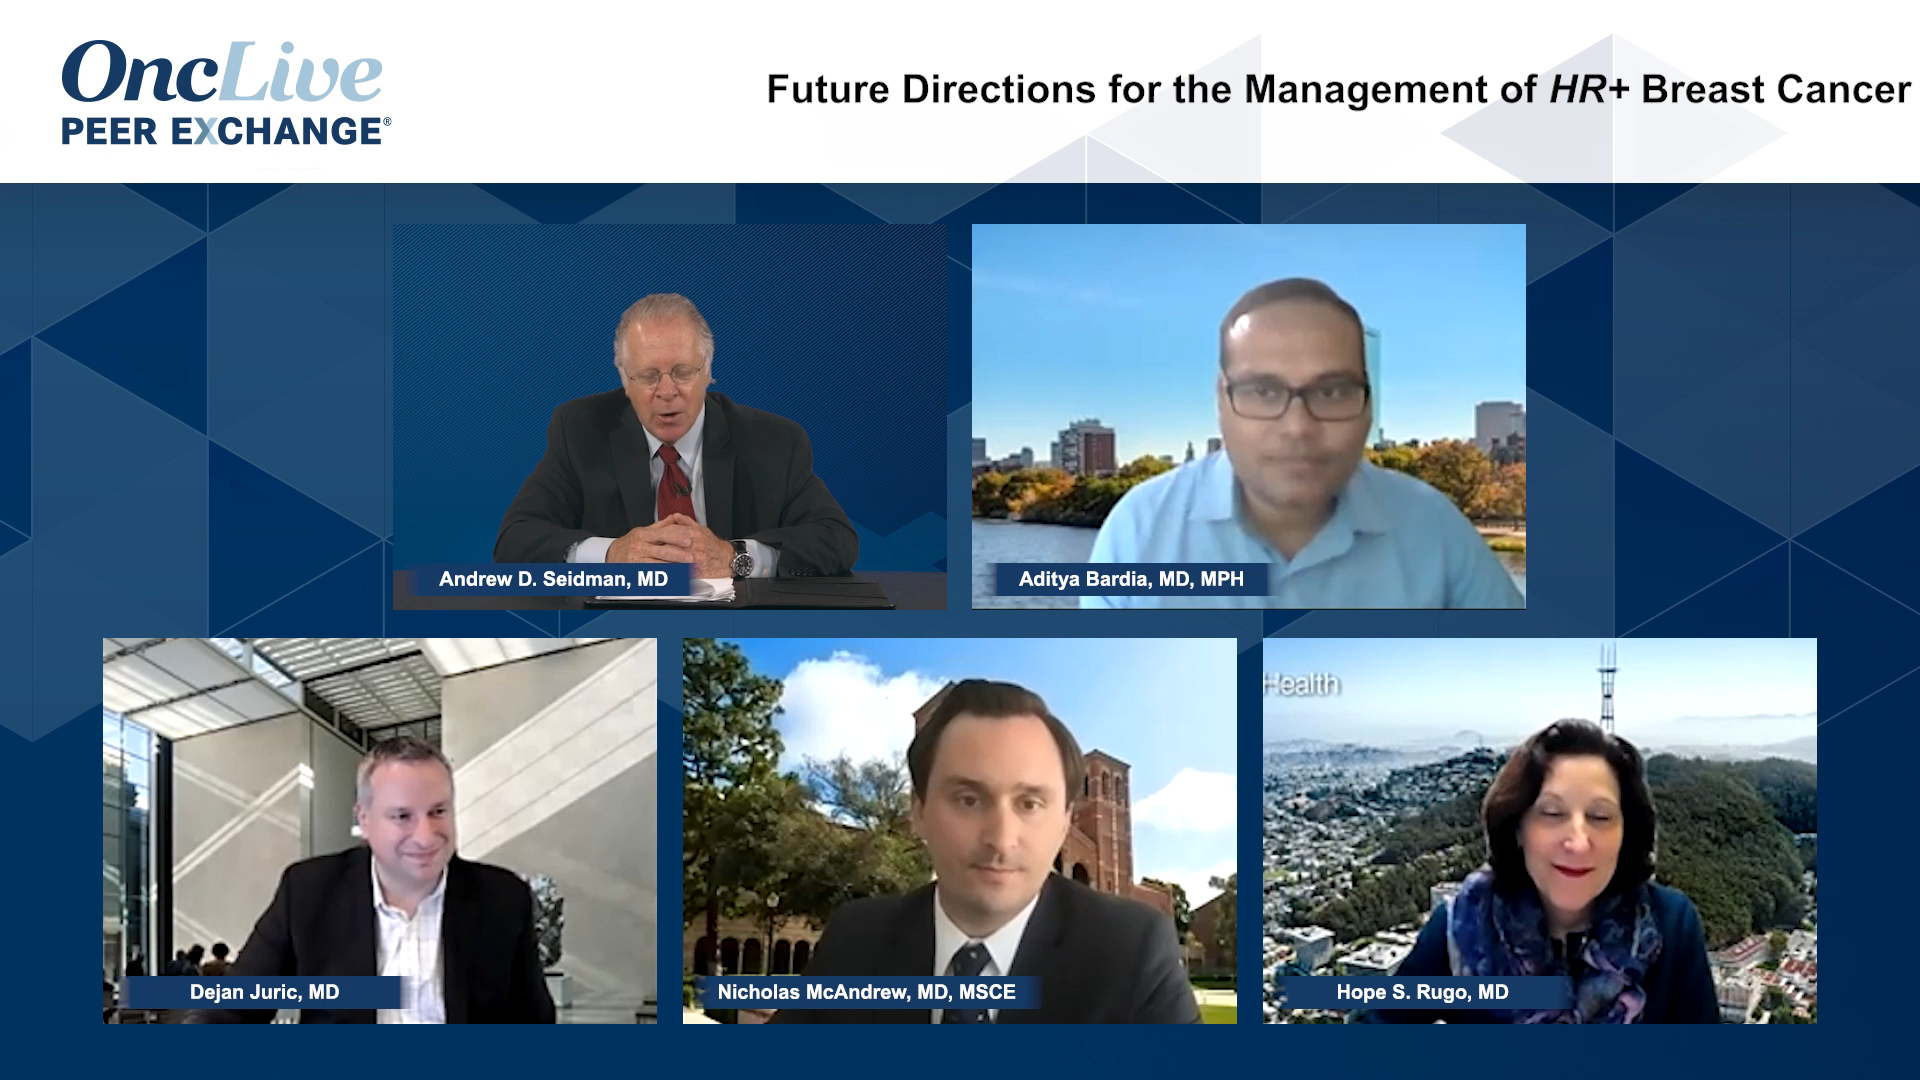 Future Directions for the Management of HR+ Breast Cancer